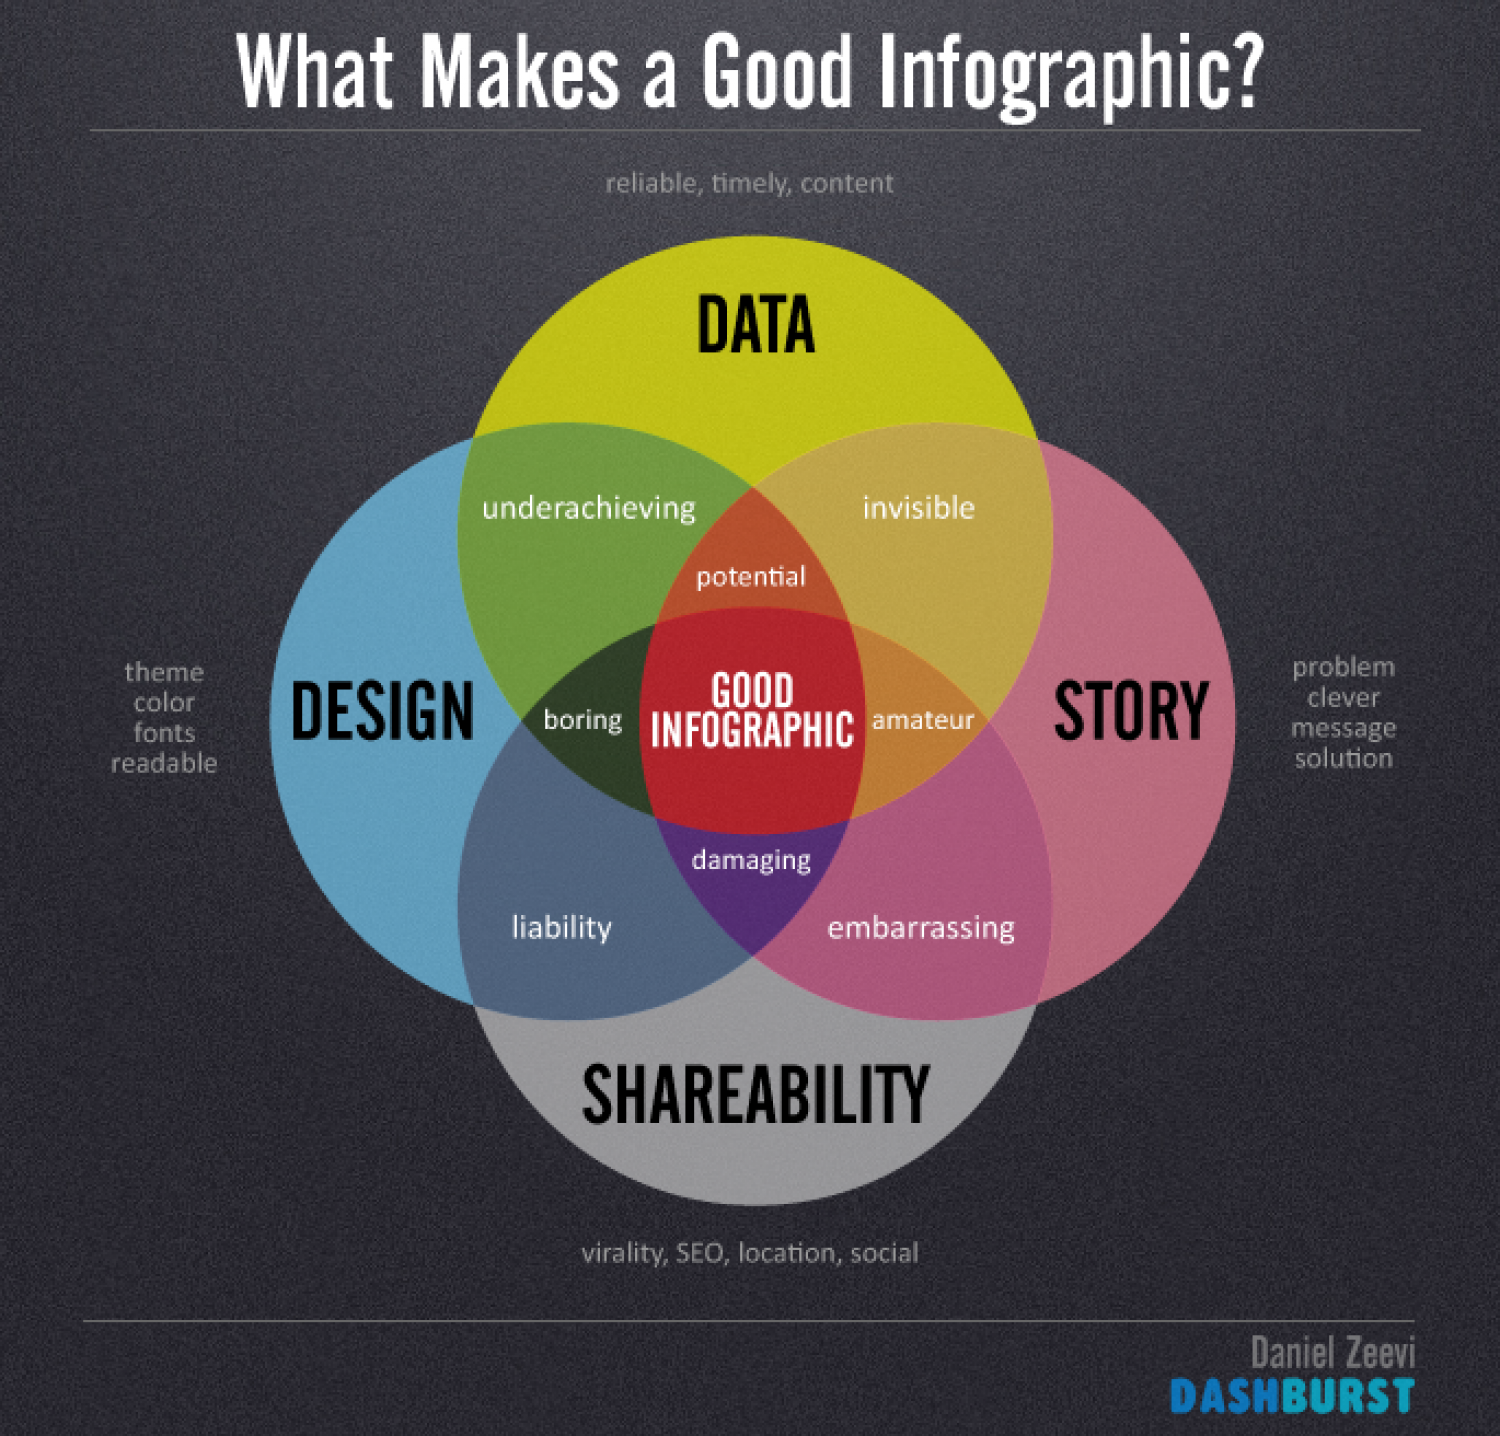 b"How to Make an Infographic with Easellys Free Infographic Maker"